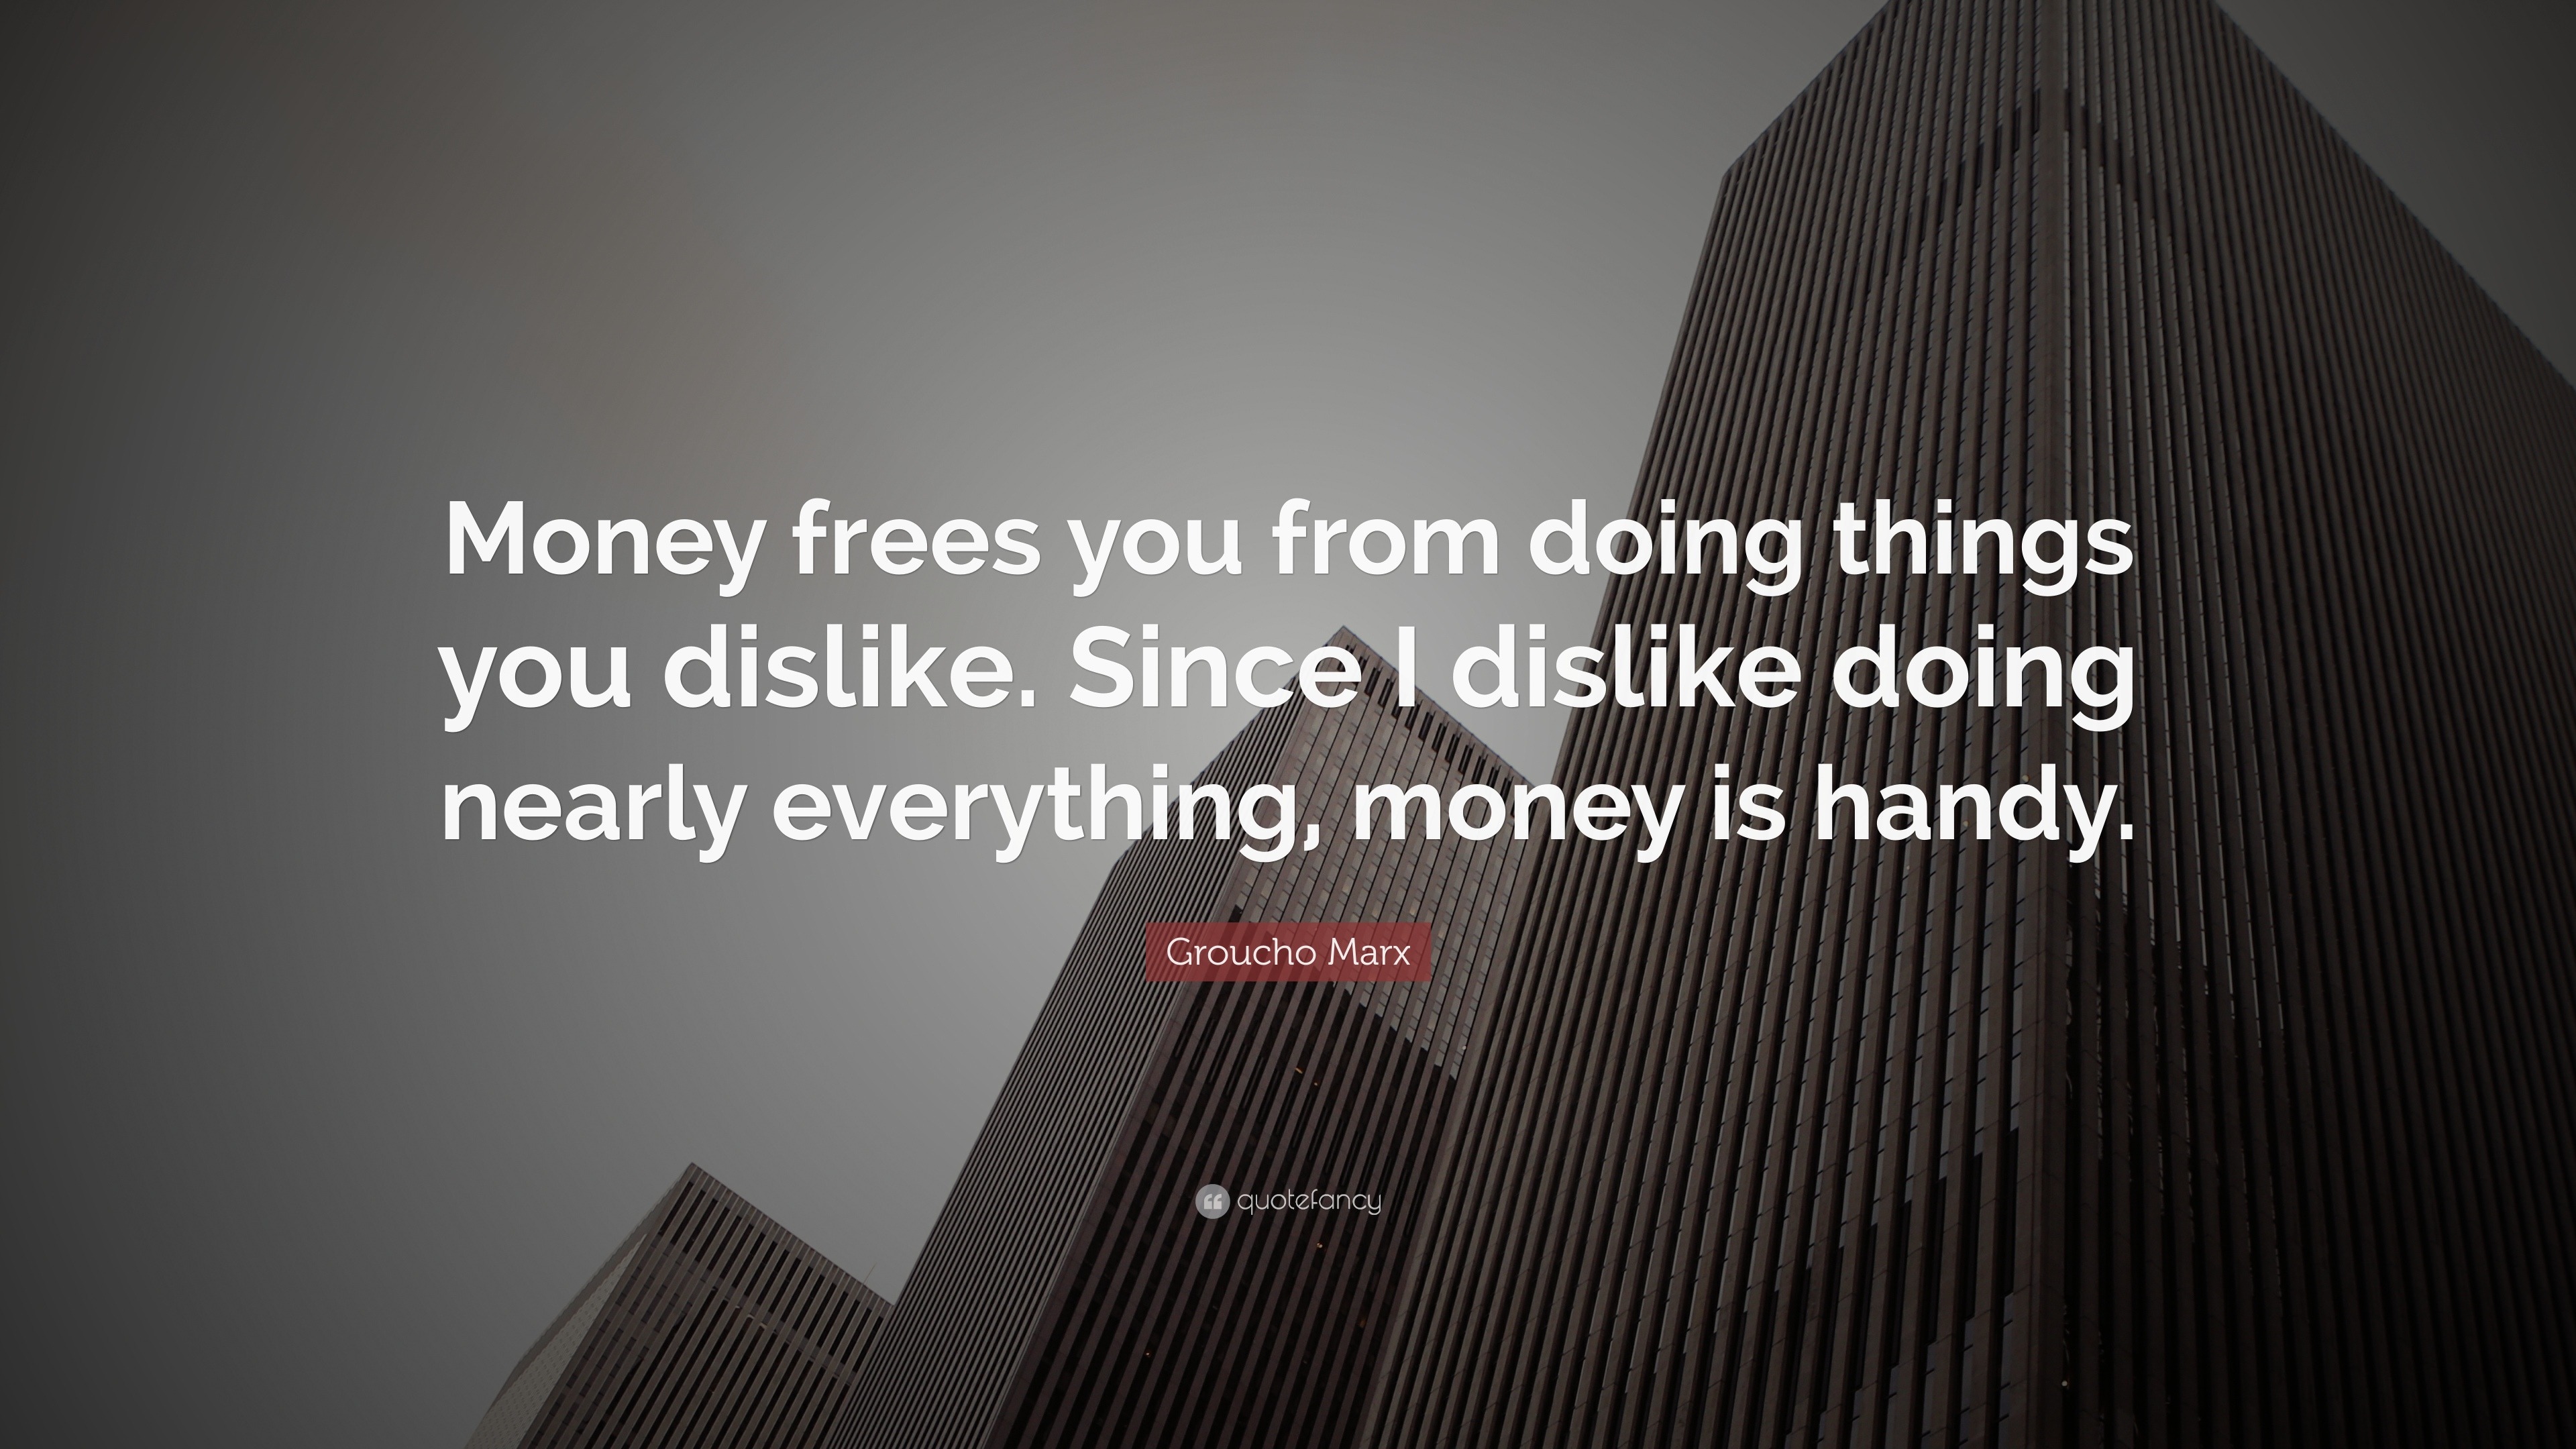 Groucho Marx Quote Money Frees You From Doing Things You Dislike Since I Dislike Doing Nearly Everything Money Is Handy 10 Wallpapers Quotefancy